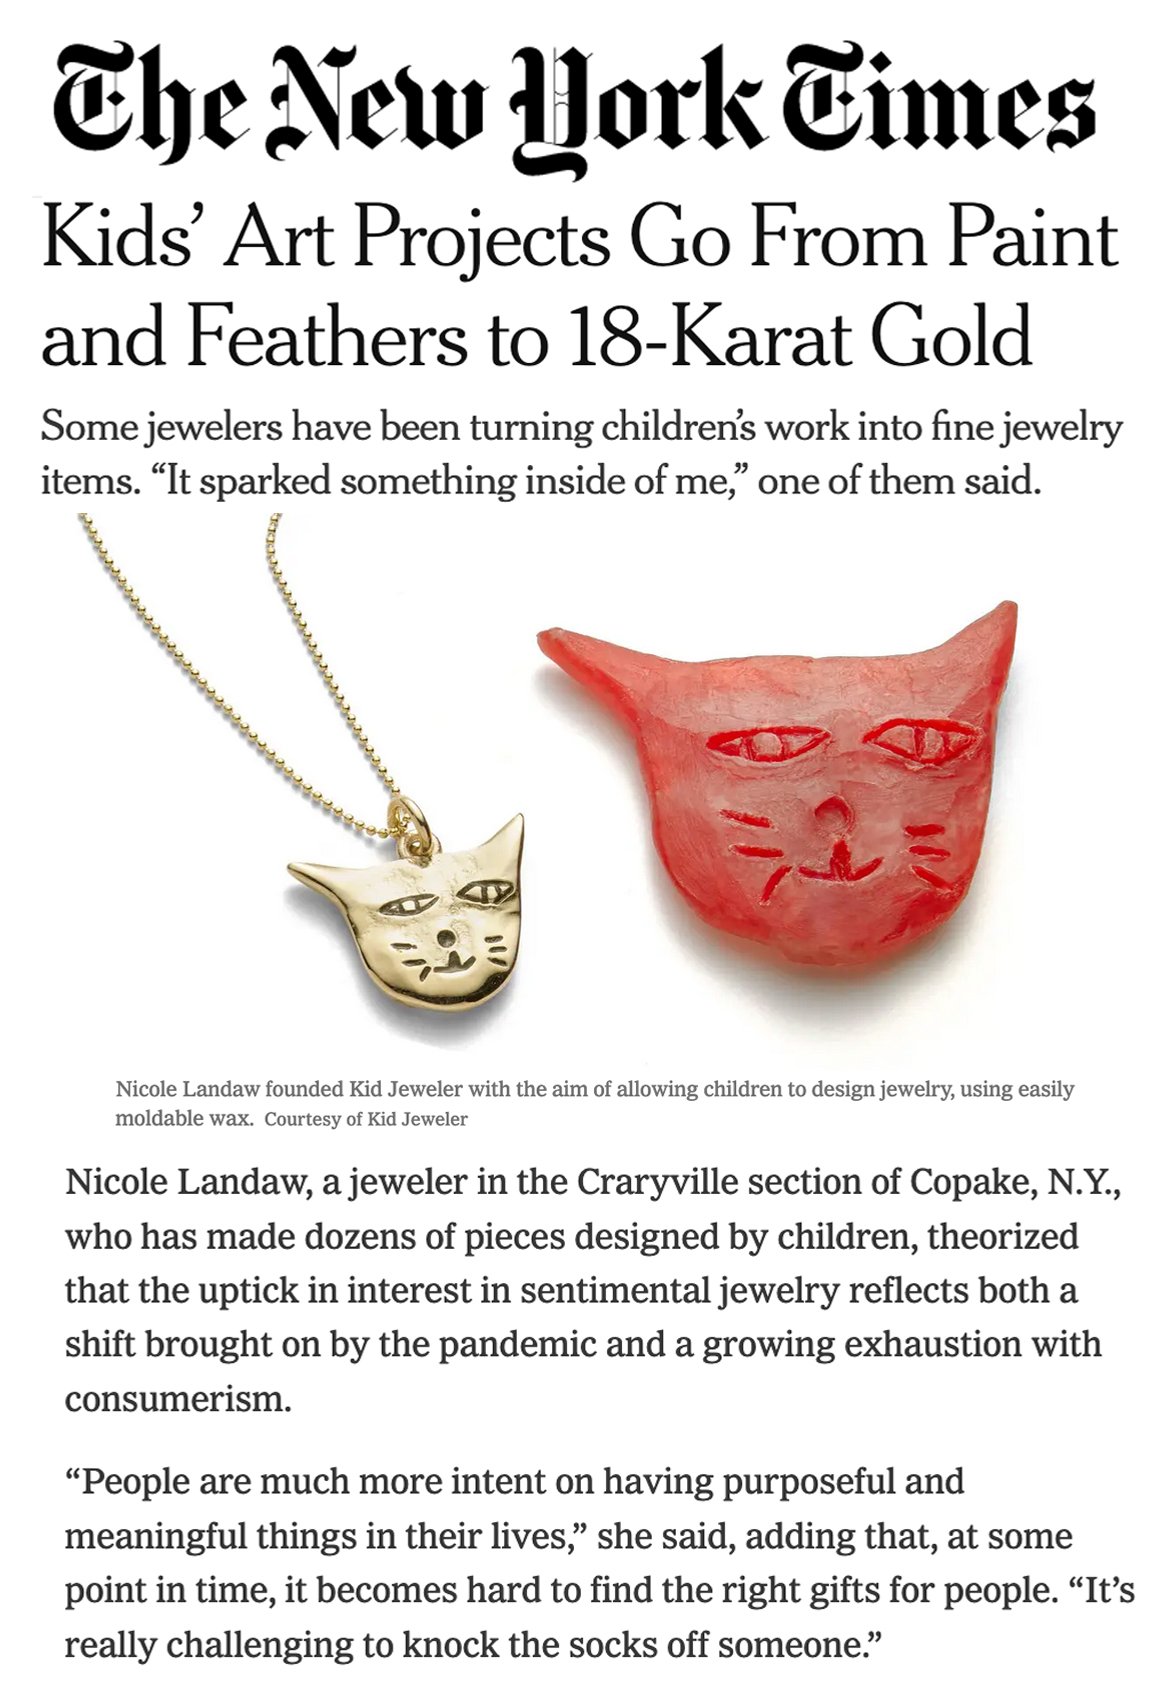  Nicole and Kid Jeweler featured in The New York Times in March 2024. 